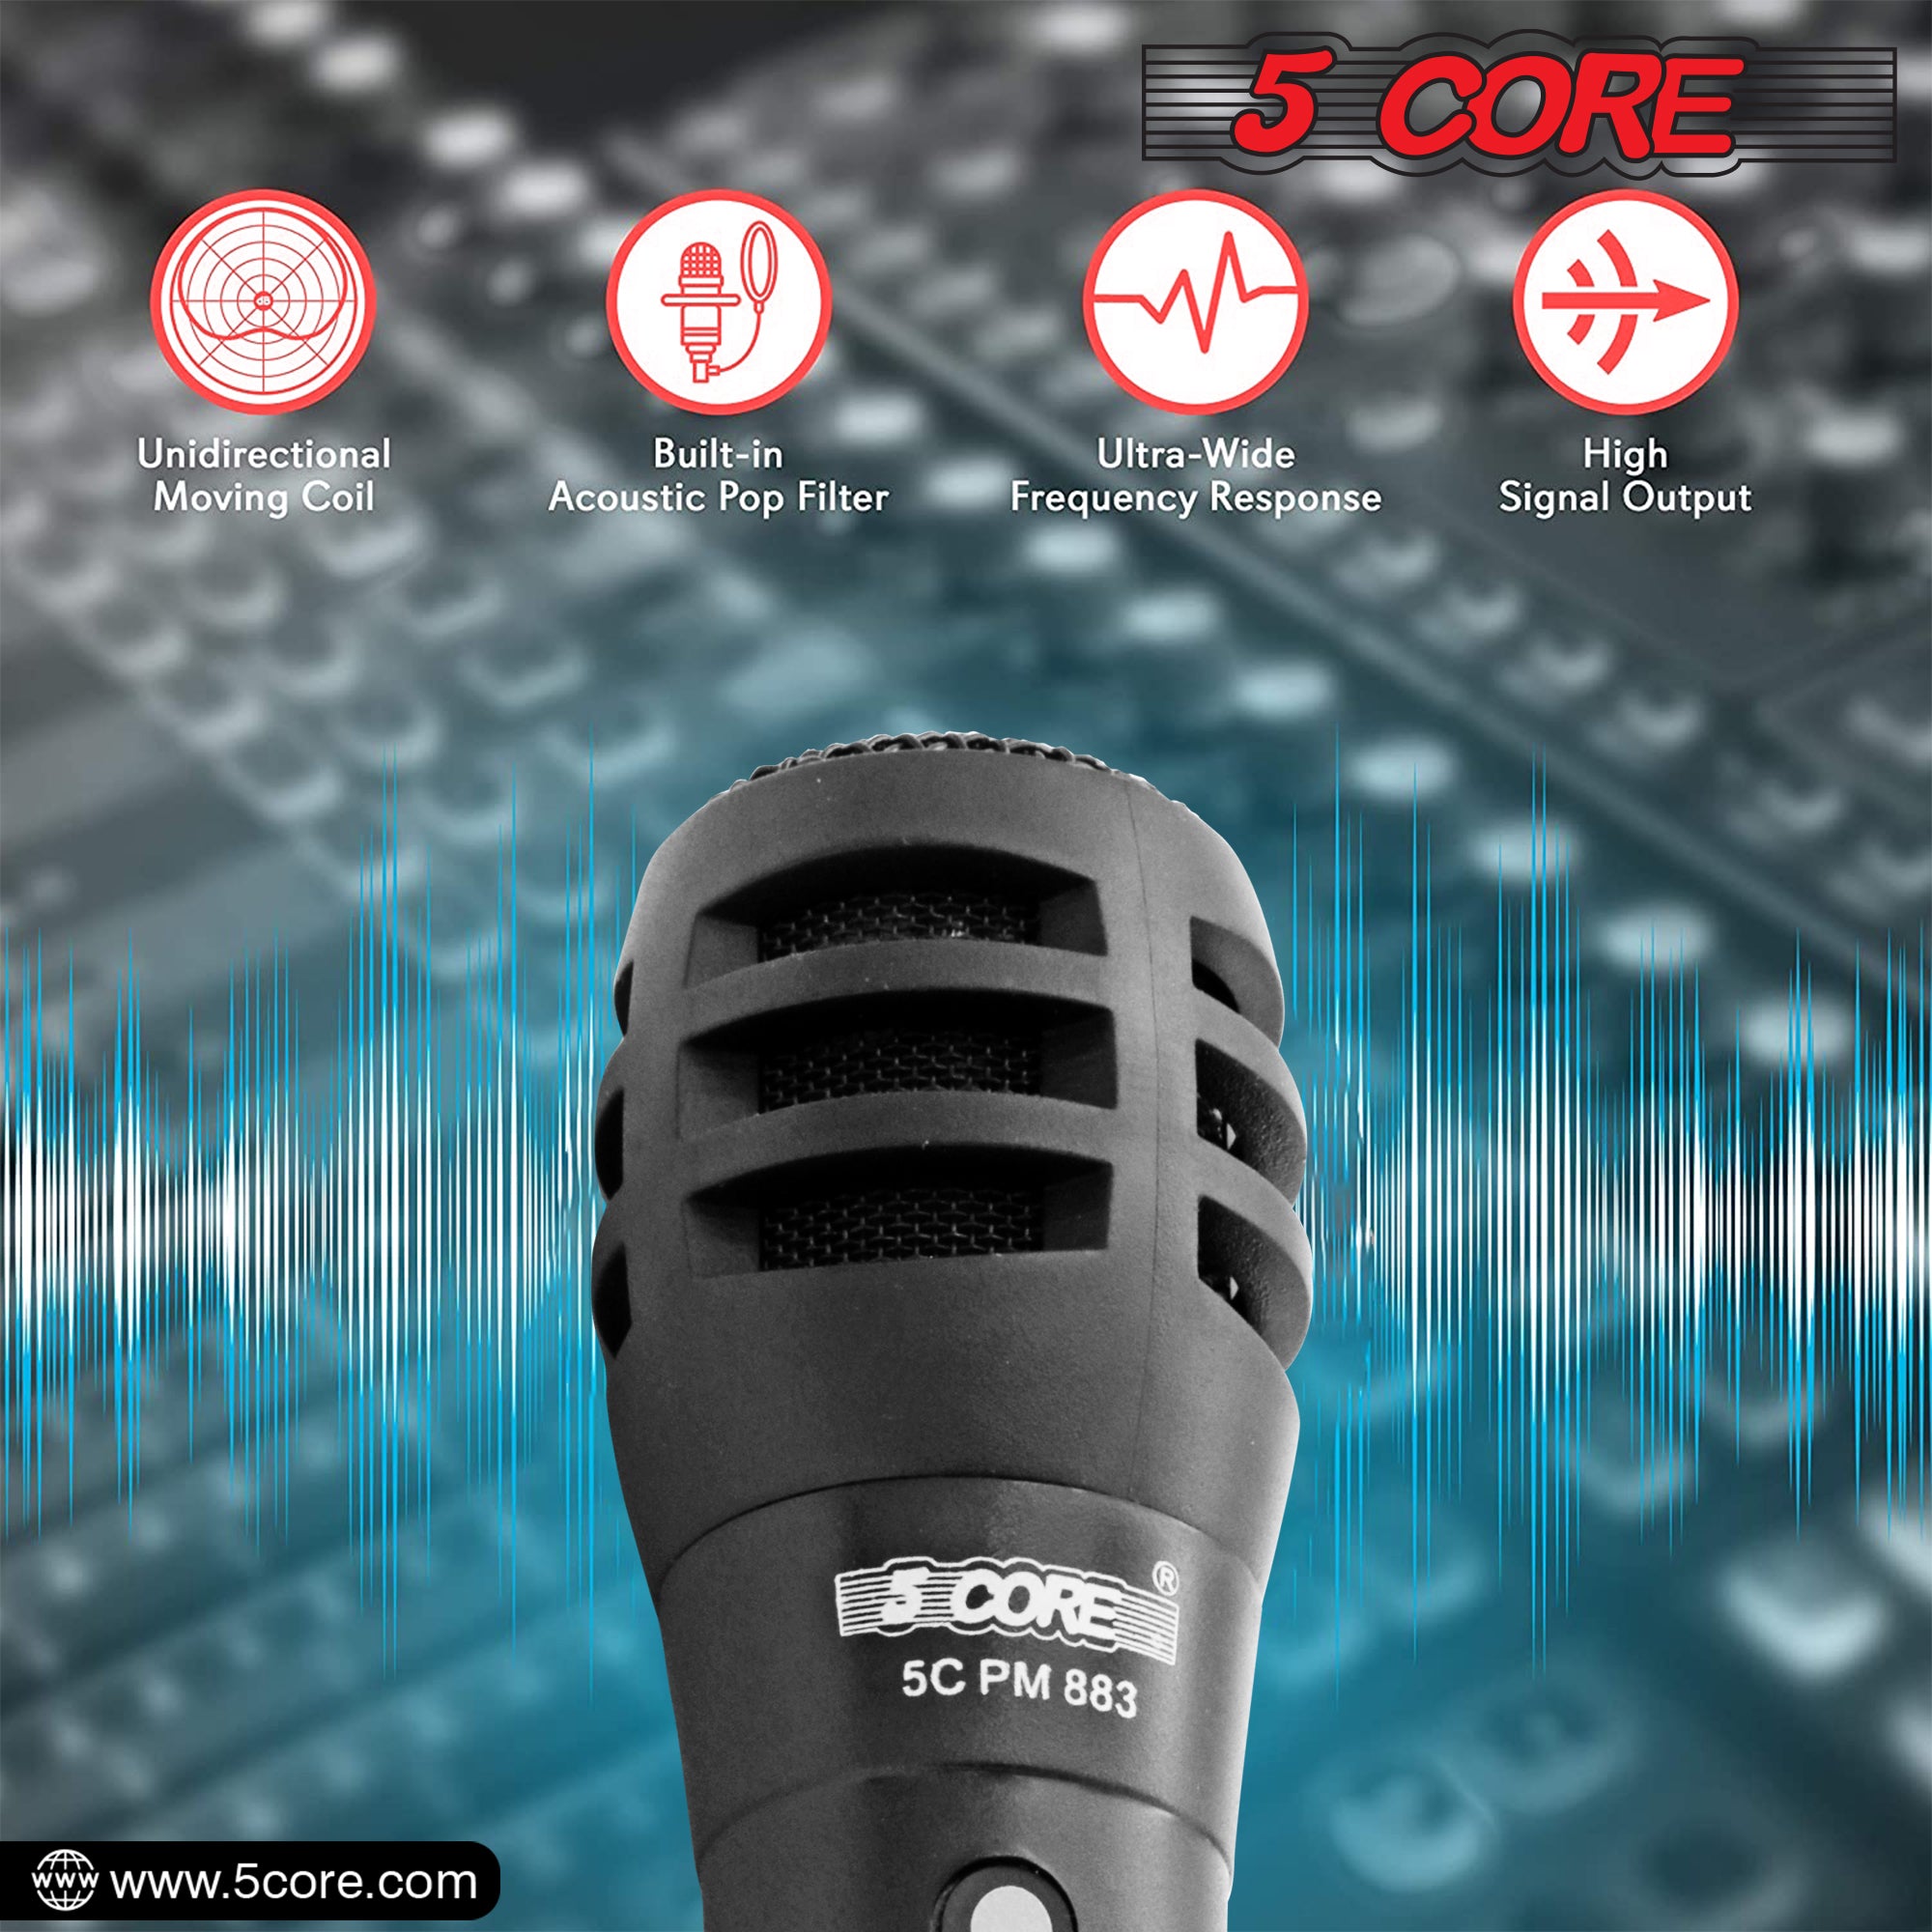 5 Core Handheld Microphone For Karaoke Singing • Dynamic Cardioid Unidirectional Vocal XLR Mic